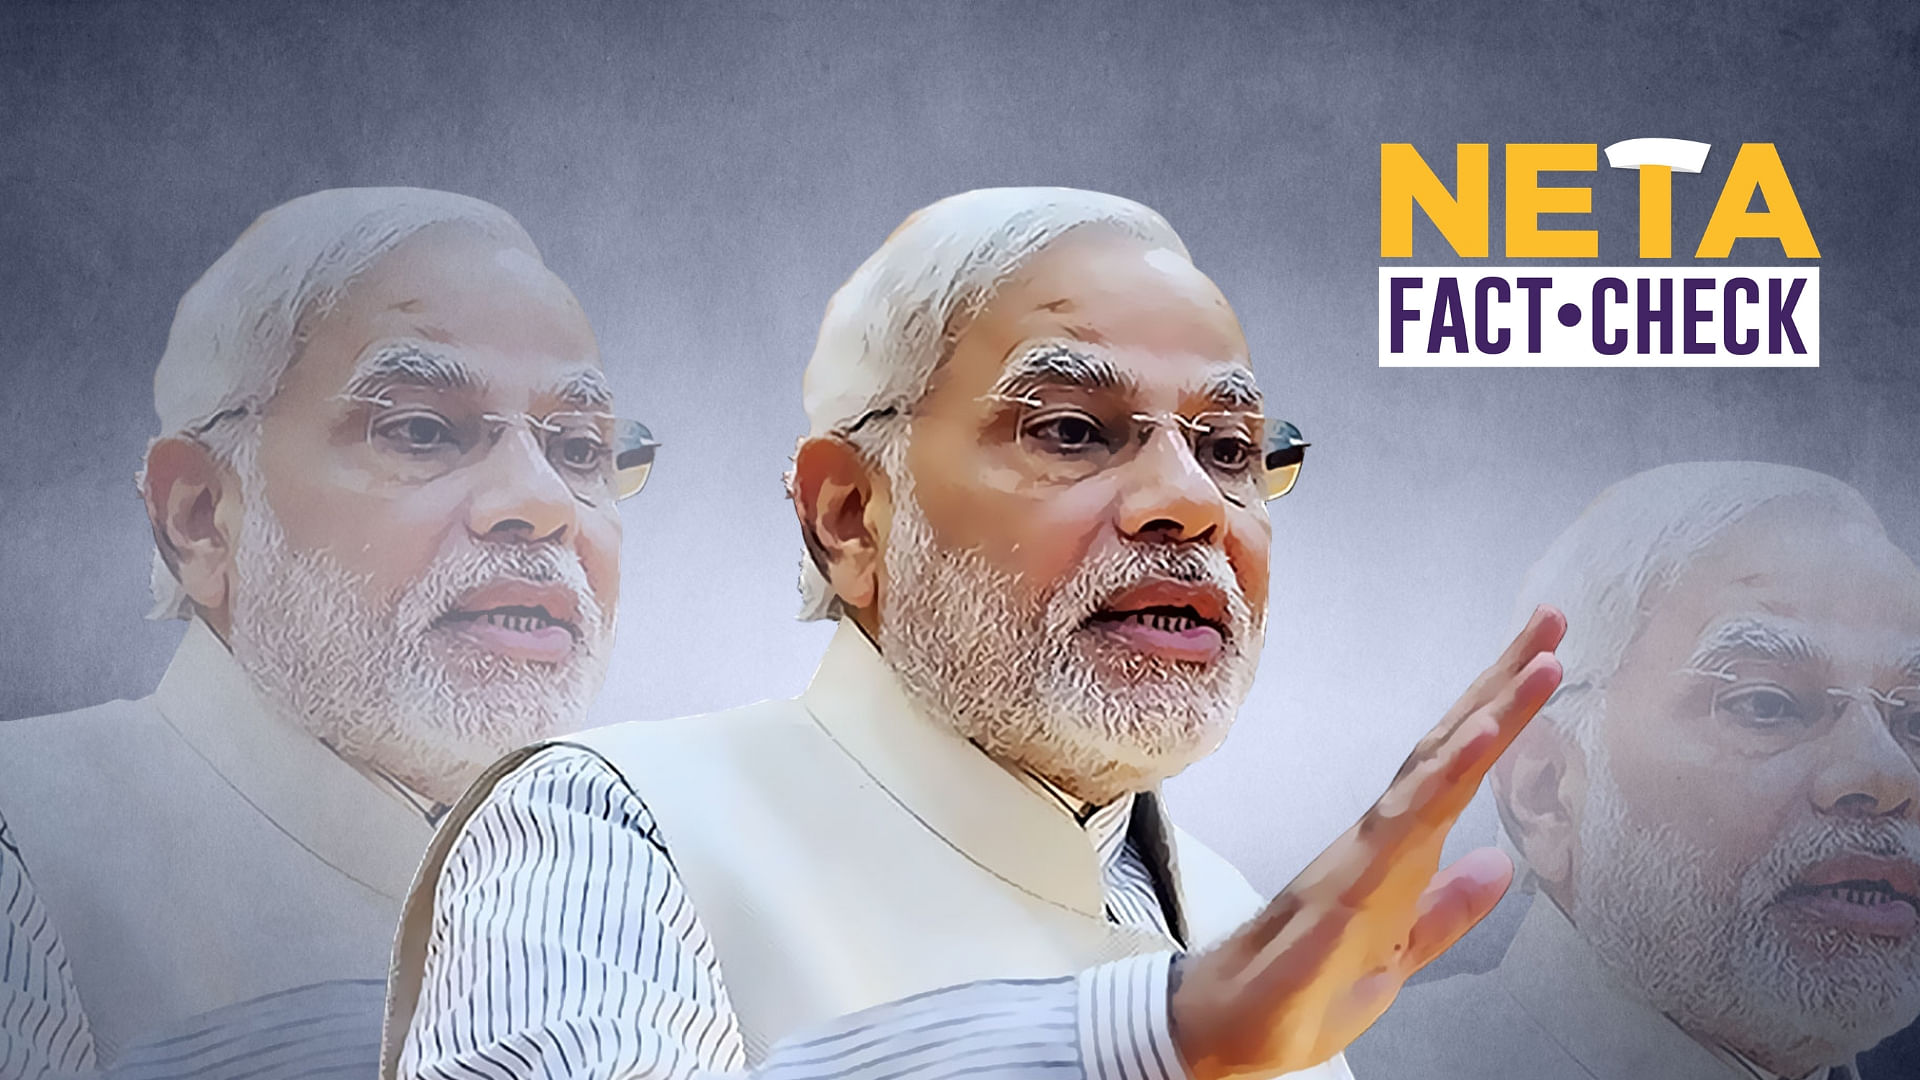 PM Modi made several claims, ranging from gas connections provided under his regime to the number of bank accounts.